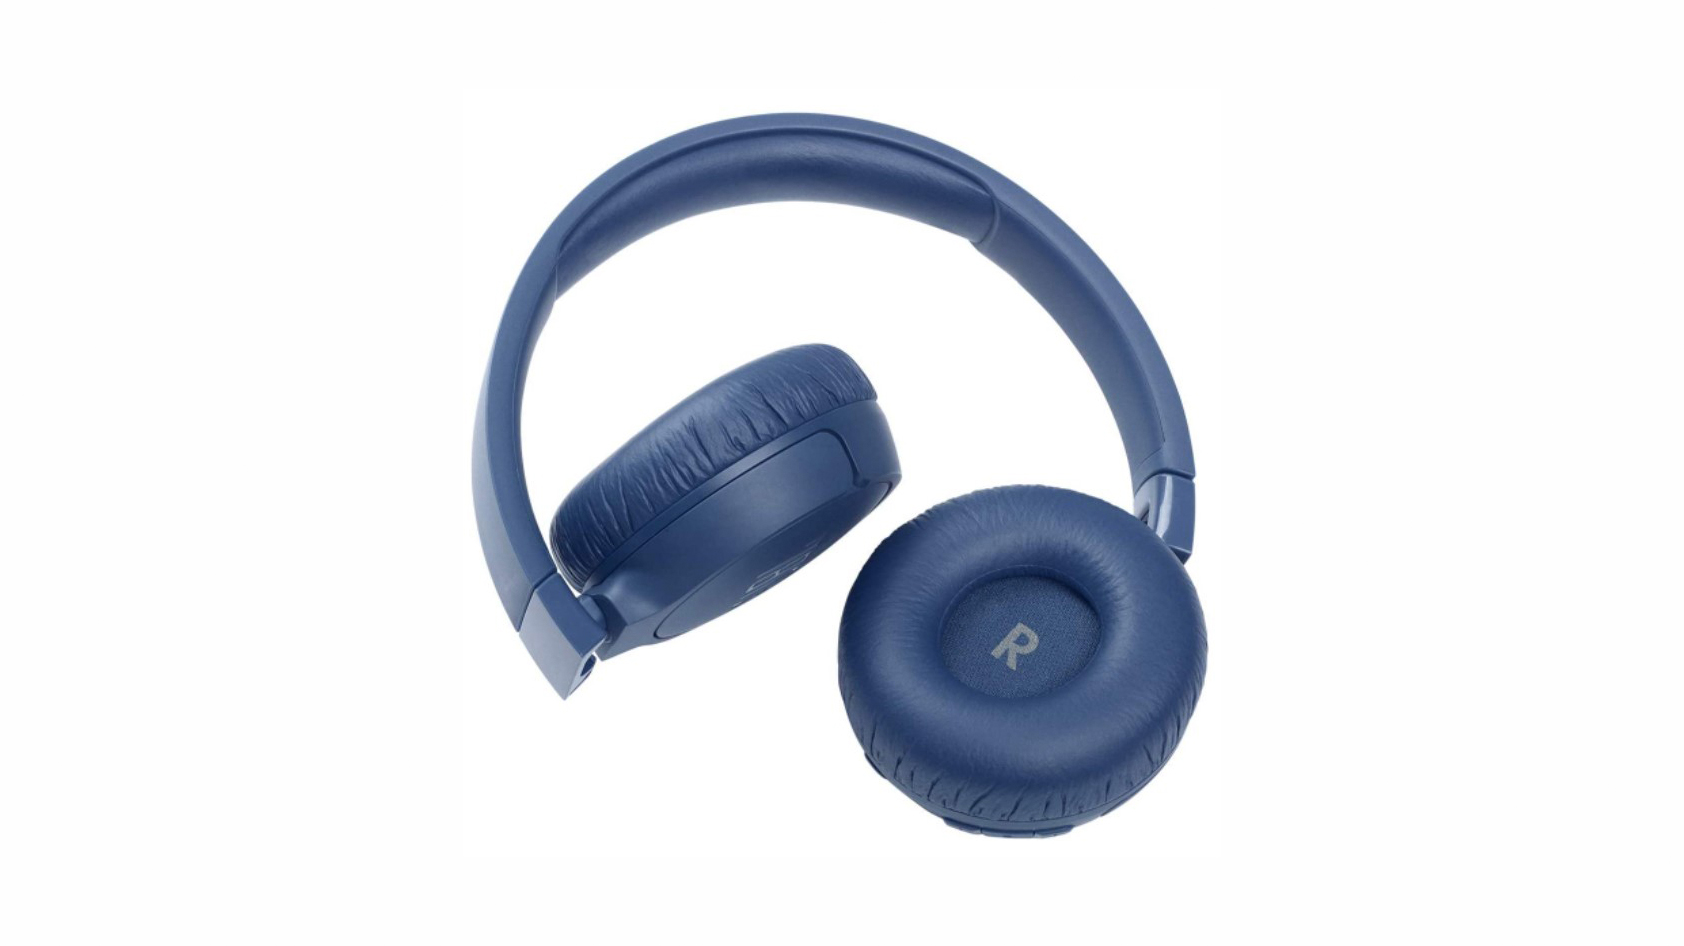 The JBL Tune 660NC on-ear headphones in blue against a white background.